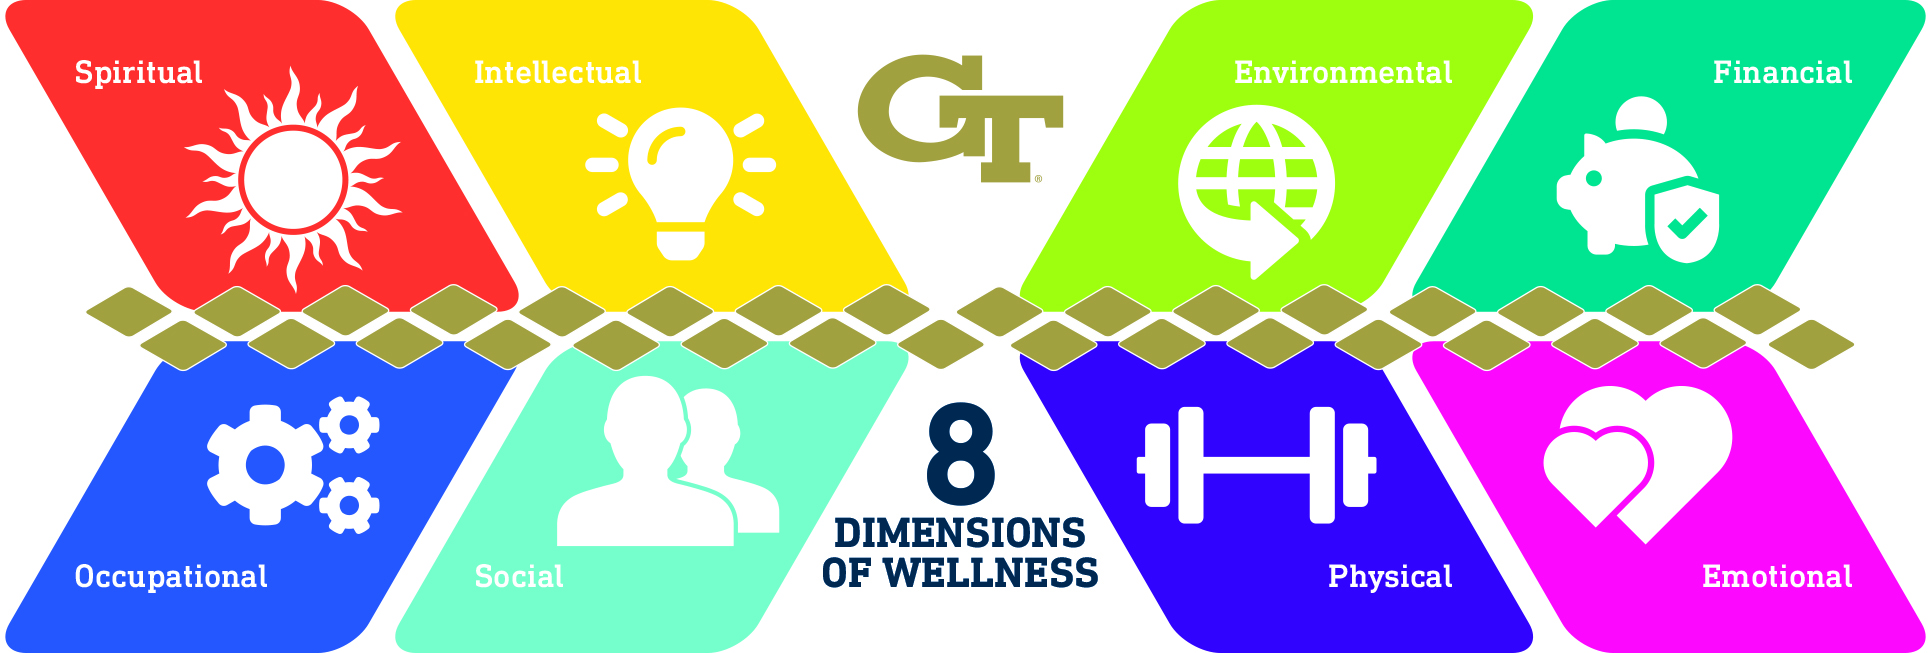 8 dimensions of wellness graphic